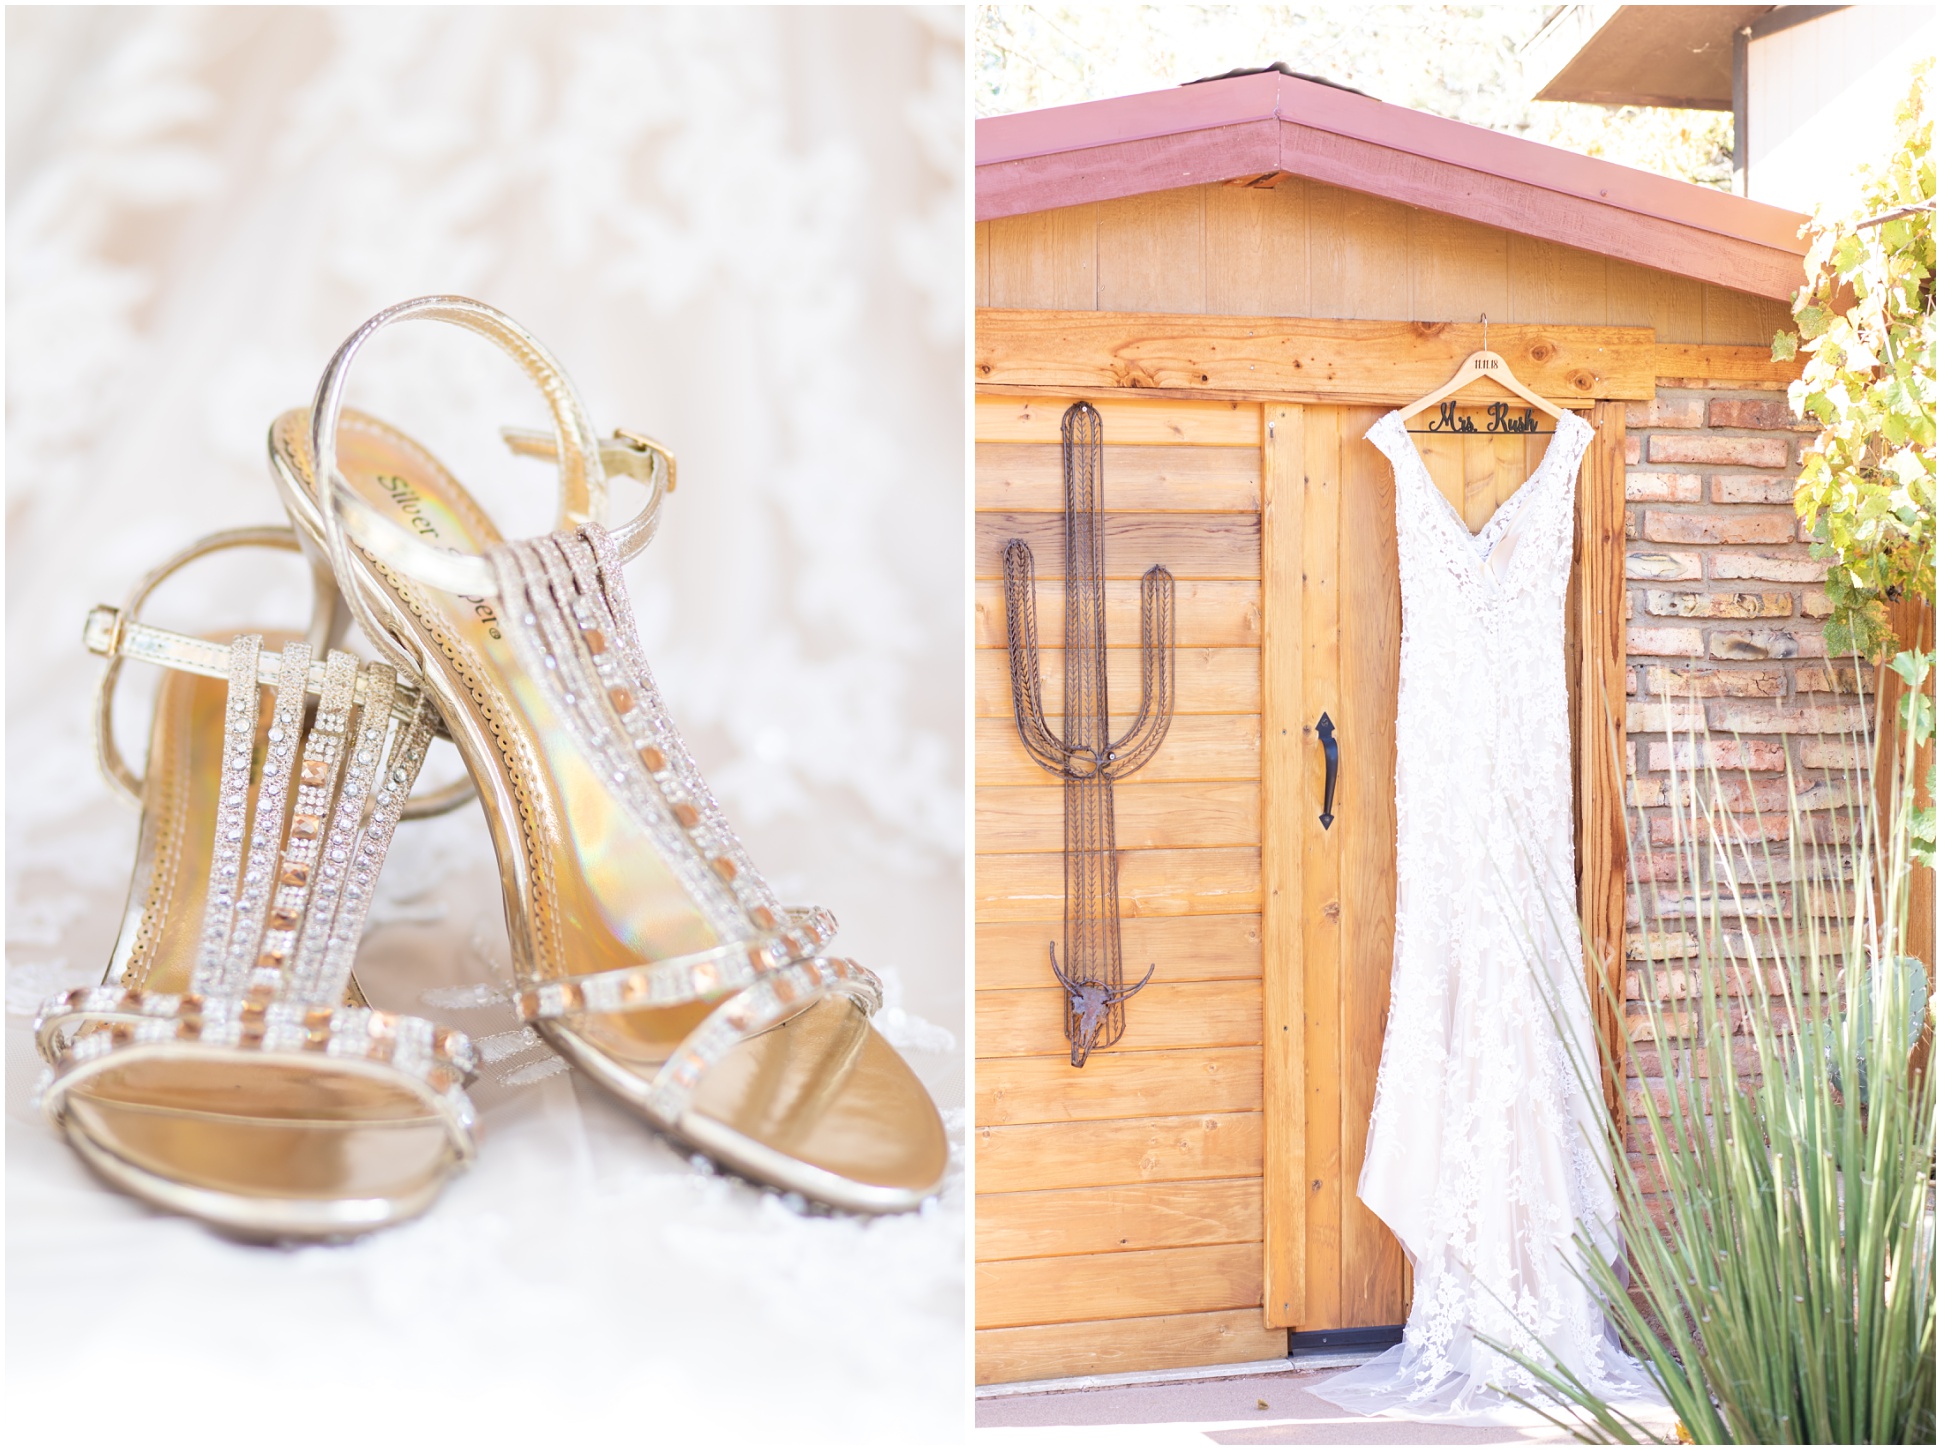 Left Image: Bride's golden heels, right image: dress hanging on a bath house with metal cactus to the left